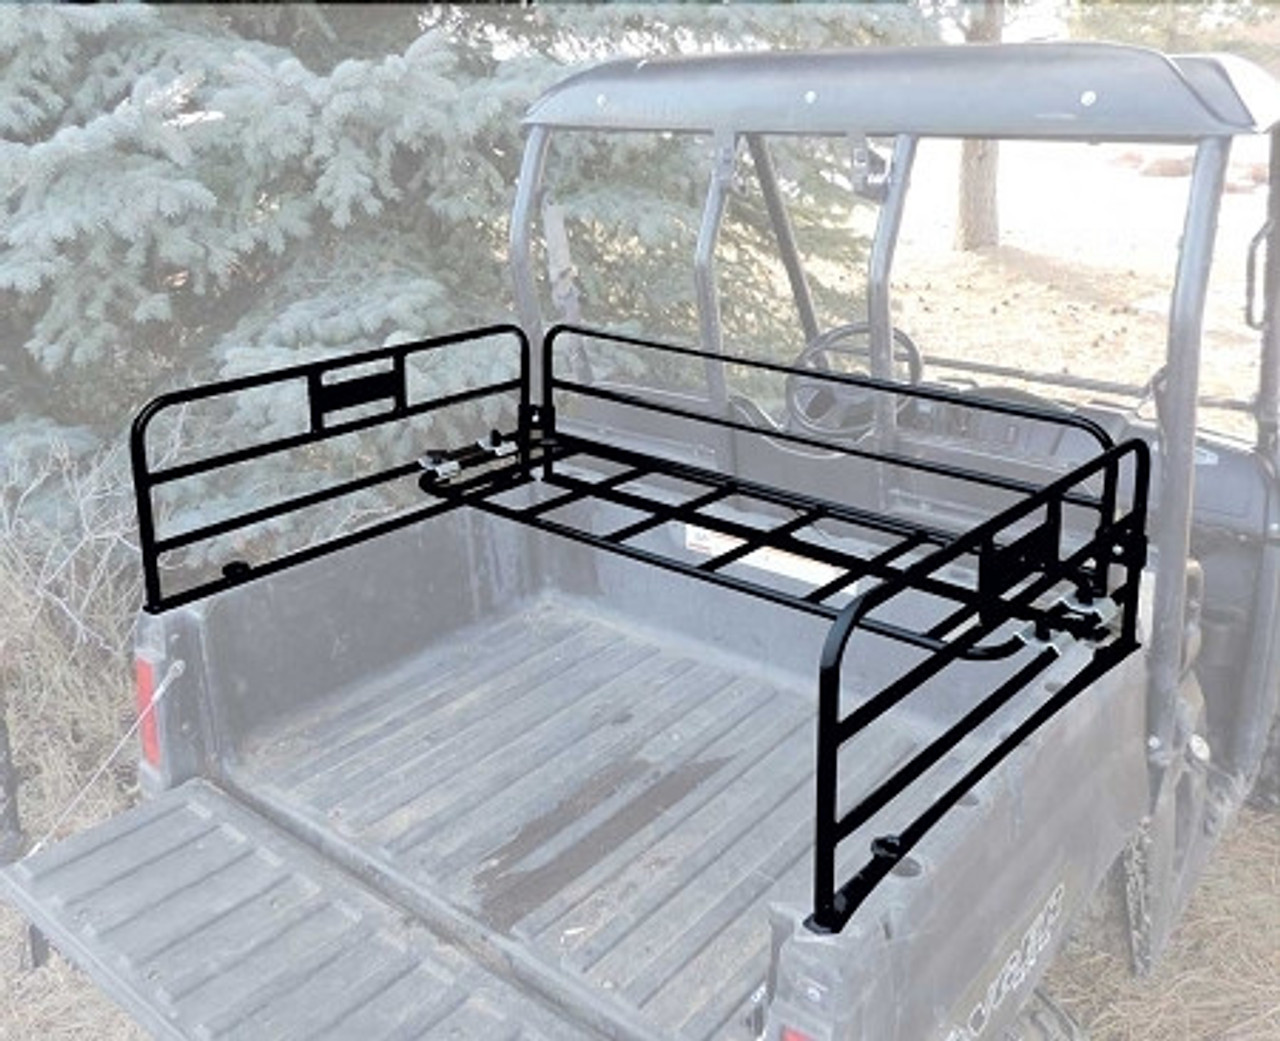 A Polaris Ranger parked on grass next to a tree, outfitted with bed rails from Hornet Outdoors. 